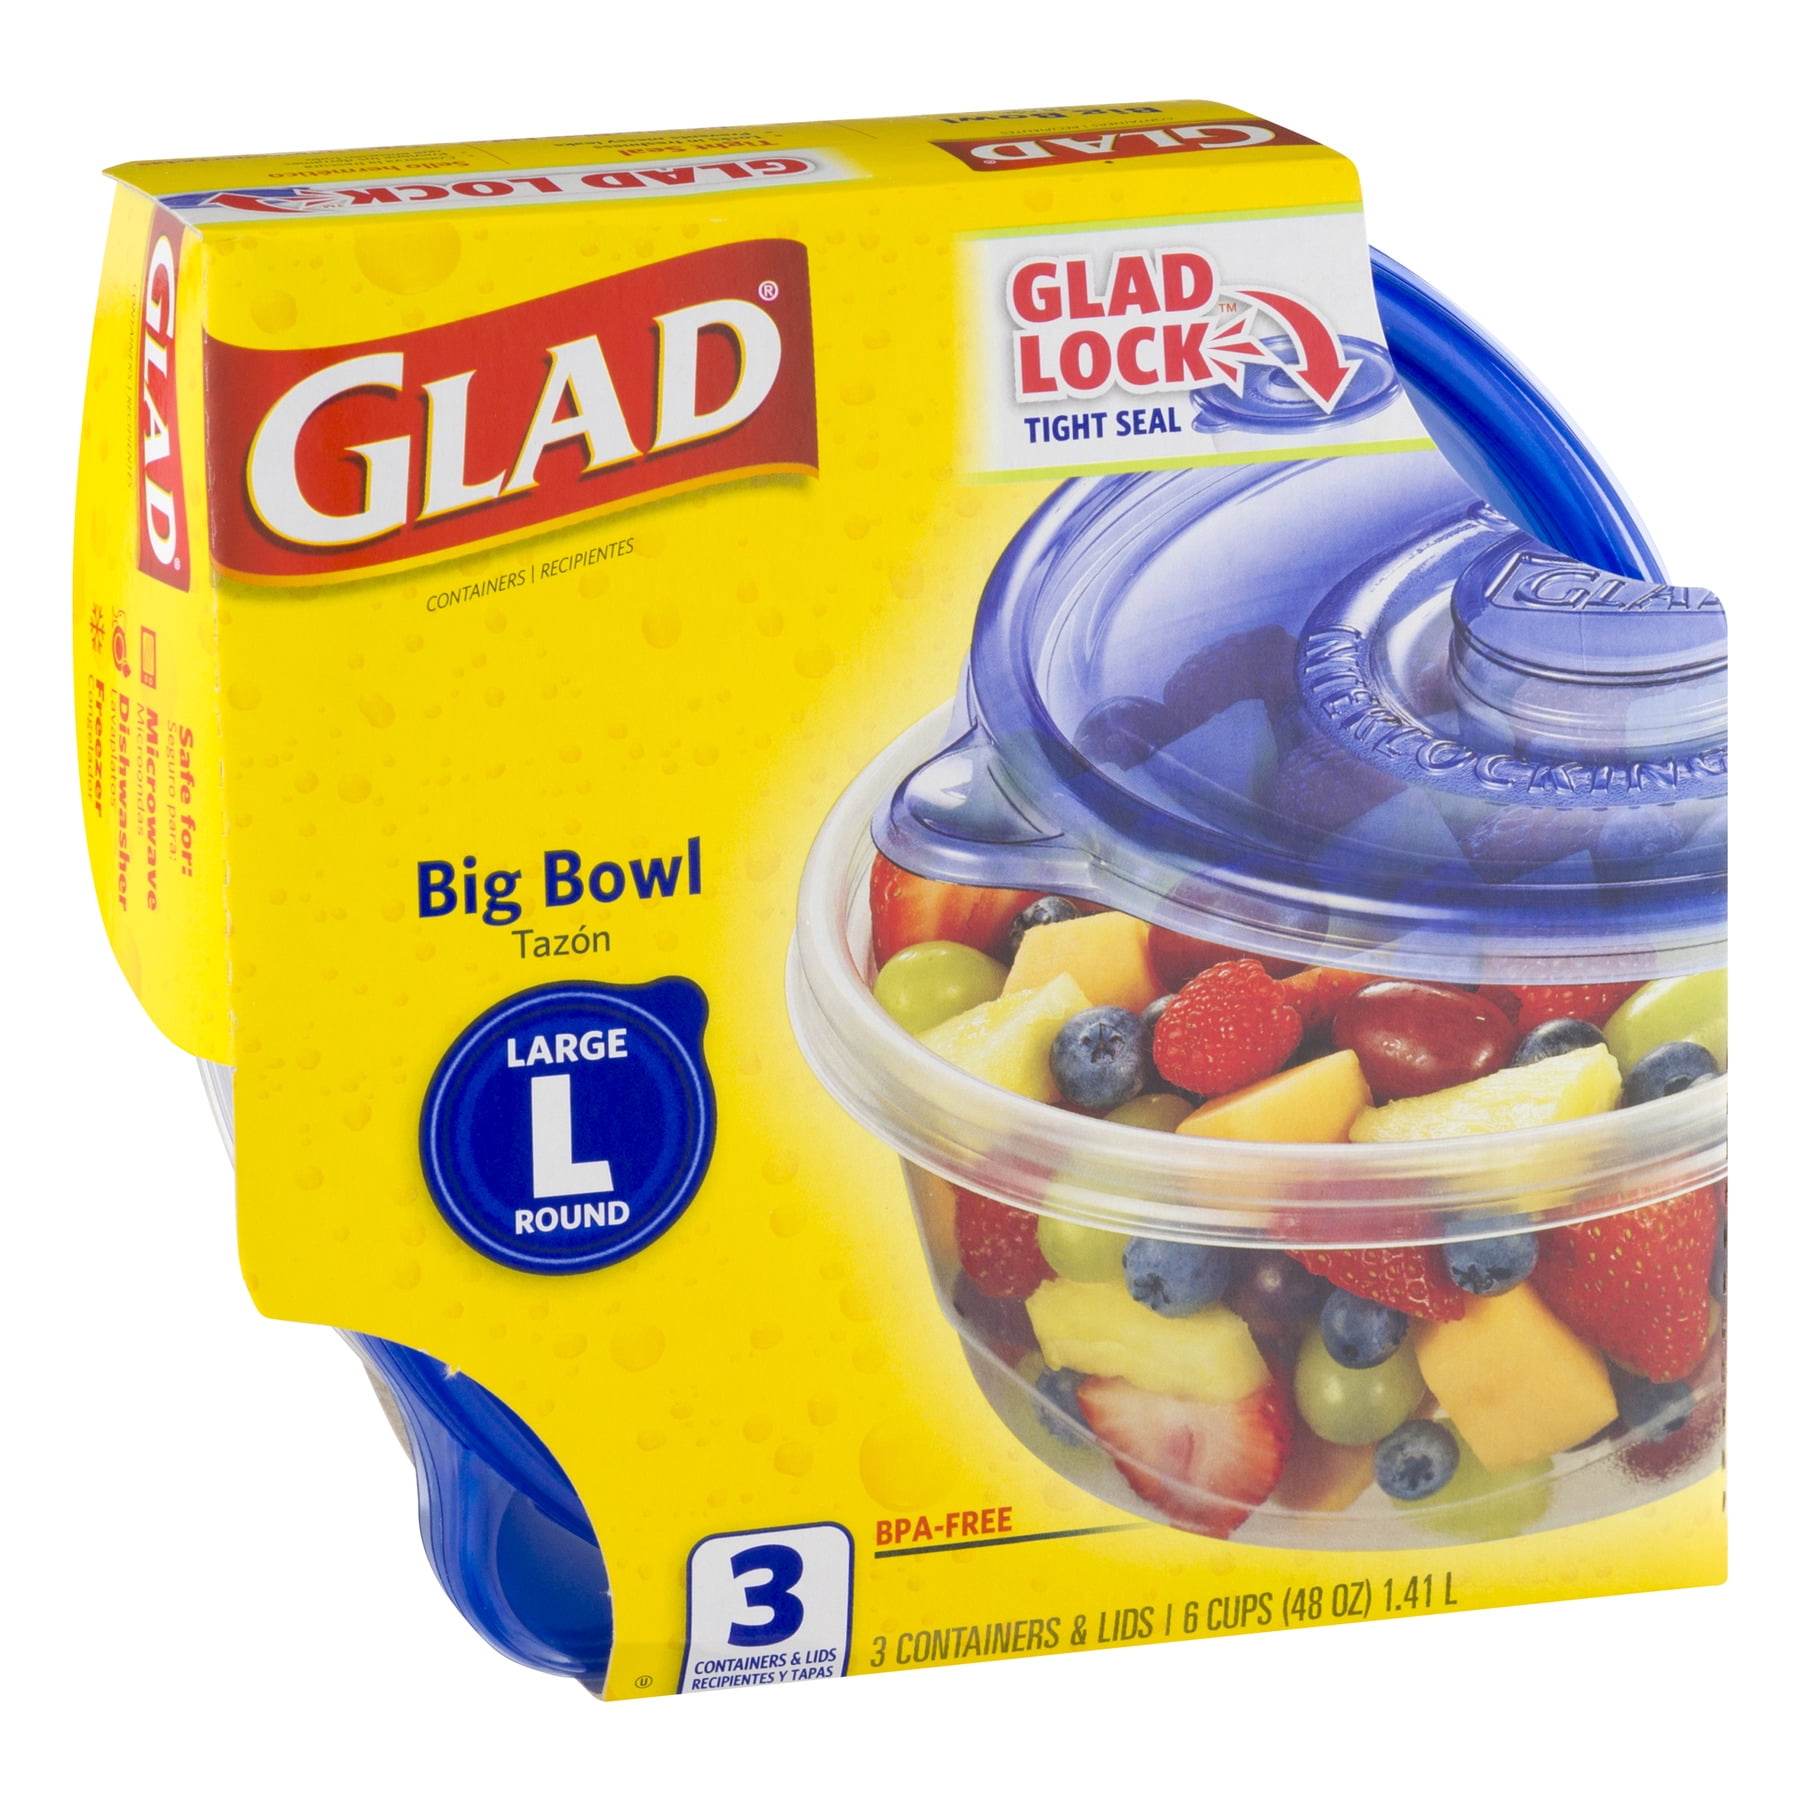 Snap And Store Medium Round Bowl Food Storage Container - 3ct/48 Fl Oz - Up  & Up™ : Target